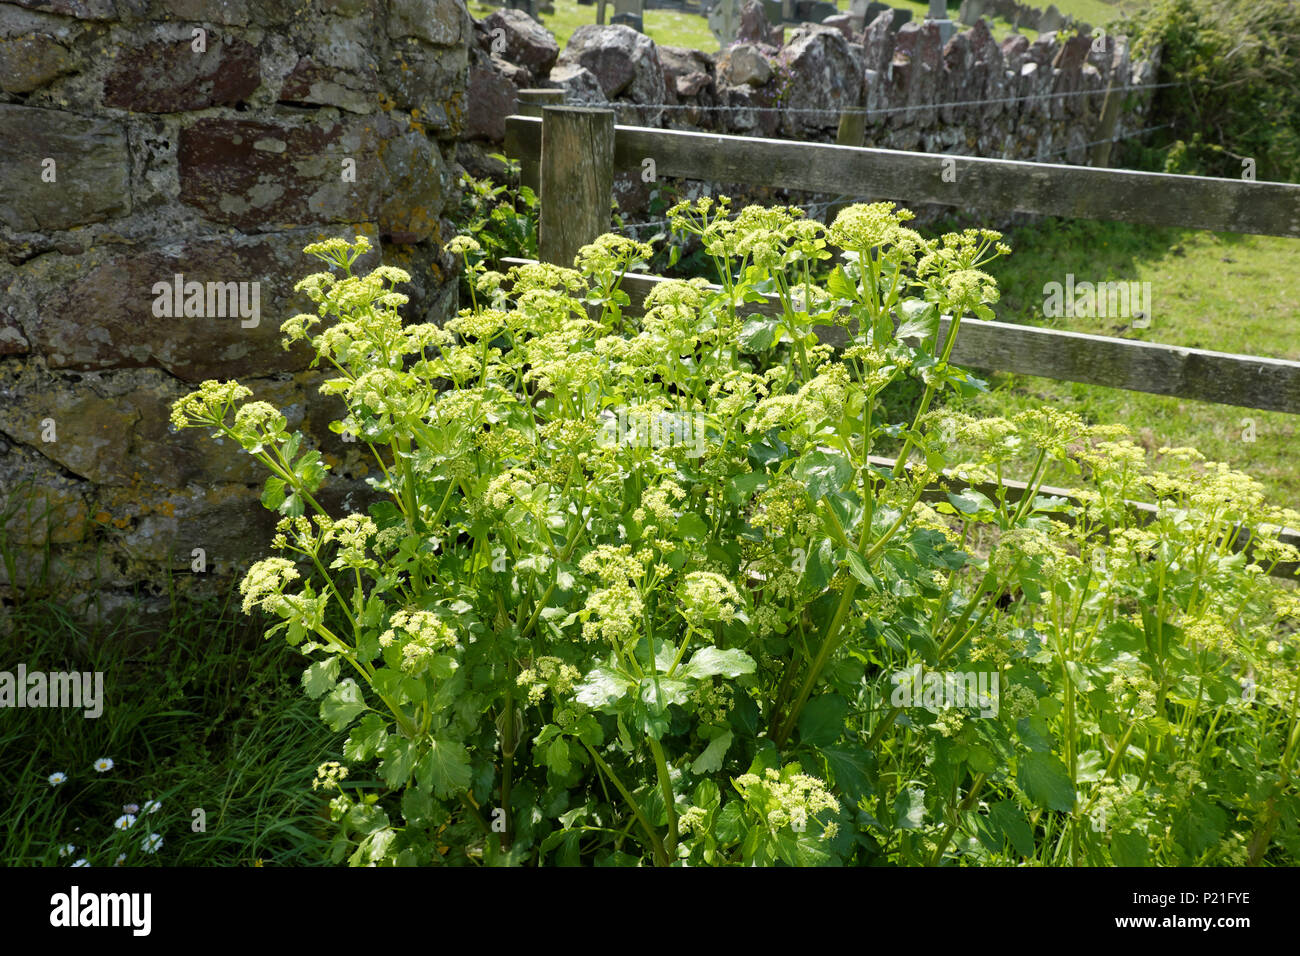 Pembrokeshire wild flower Alexanders or Smyrnium Olusatrum  growing next to a gate and stone wall in Dale, West Wales UK  KATHY DEWITT Stock Photo